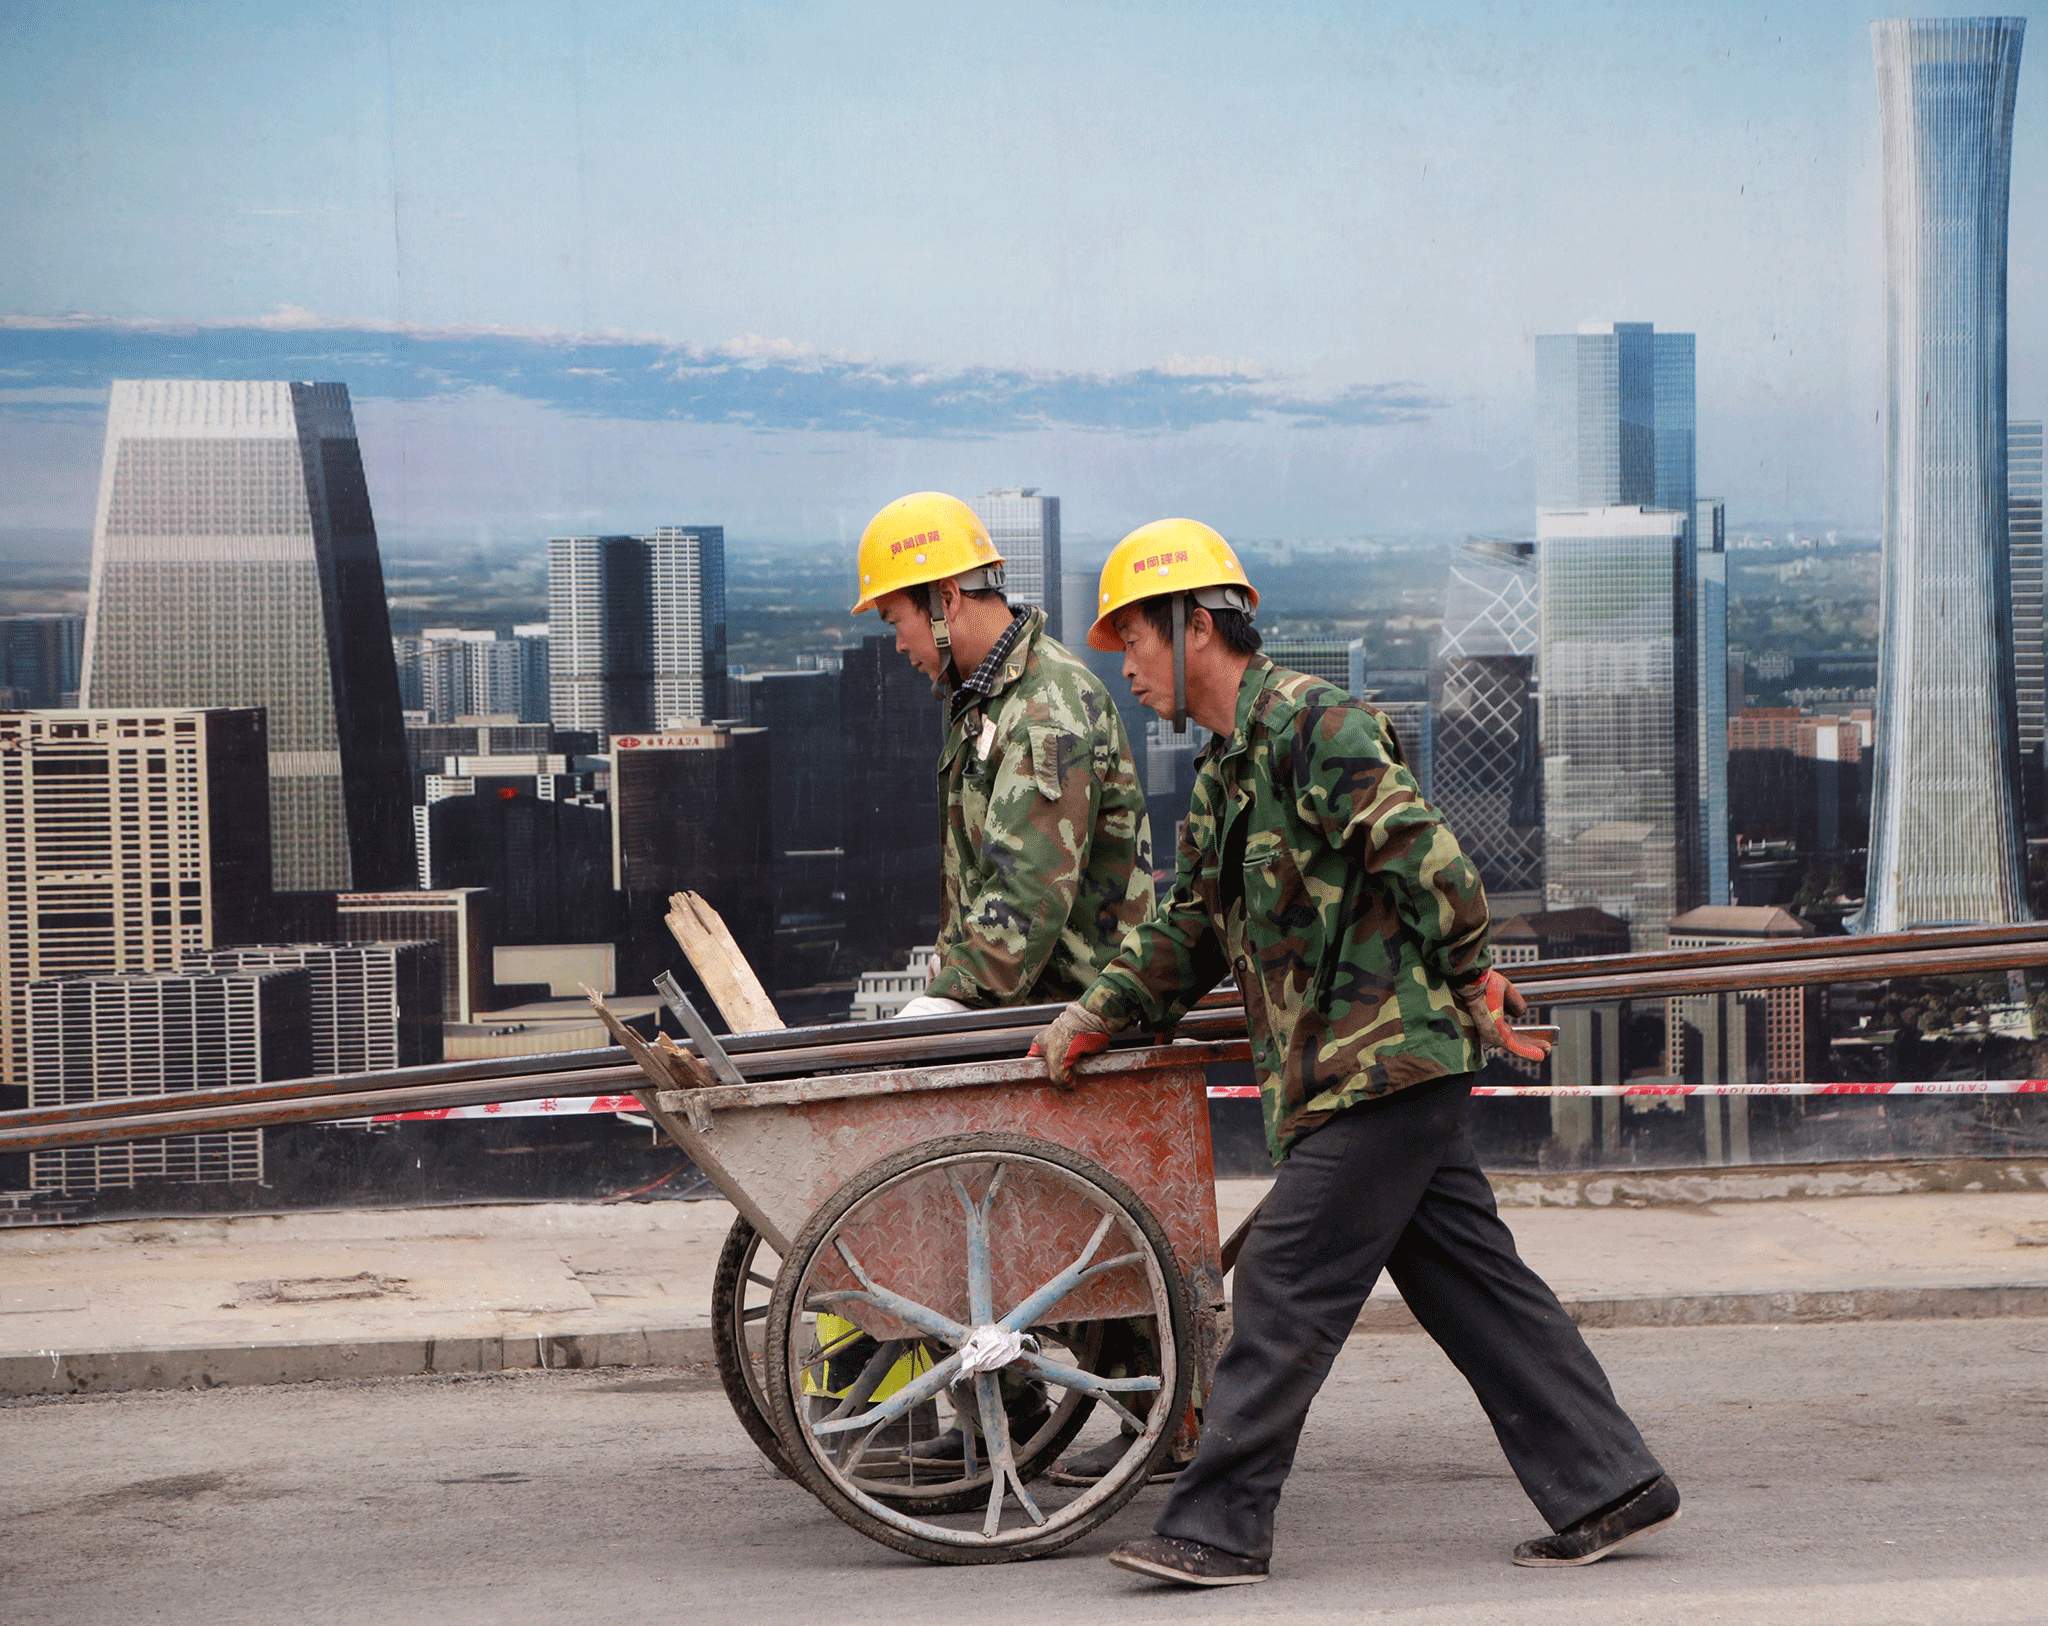 Labourers work at a construction site in Beijing - experts say unsustainable building boom is fueling growth